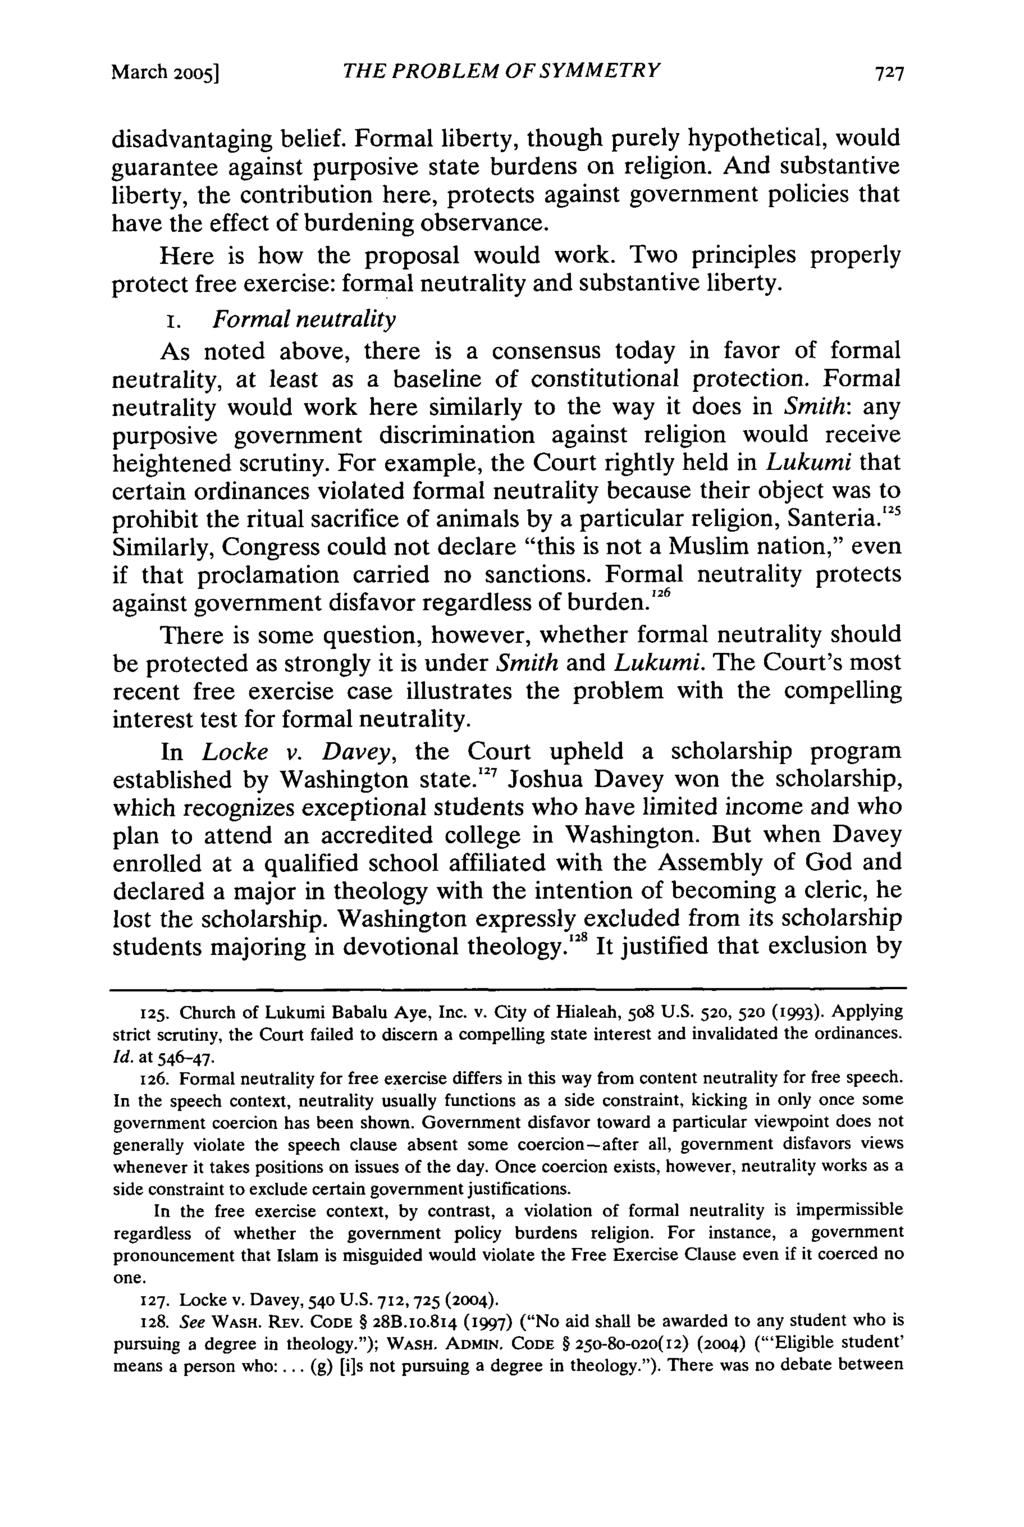 March 2005] THE PROBLEM OF SYMMETRY disadvantaging belief. Formal liberty, though purely hypothetical, would guarantee against purposive state burdens on religion.